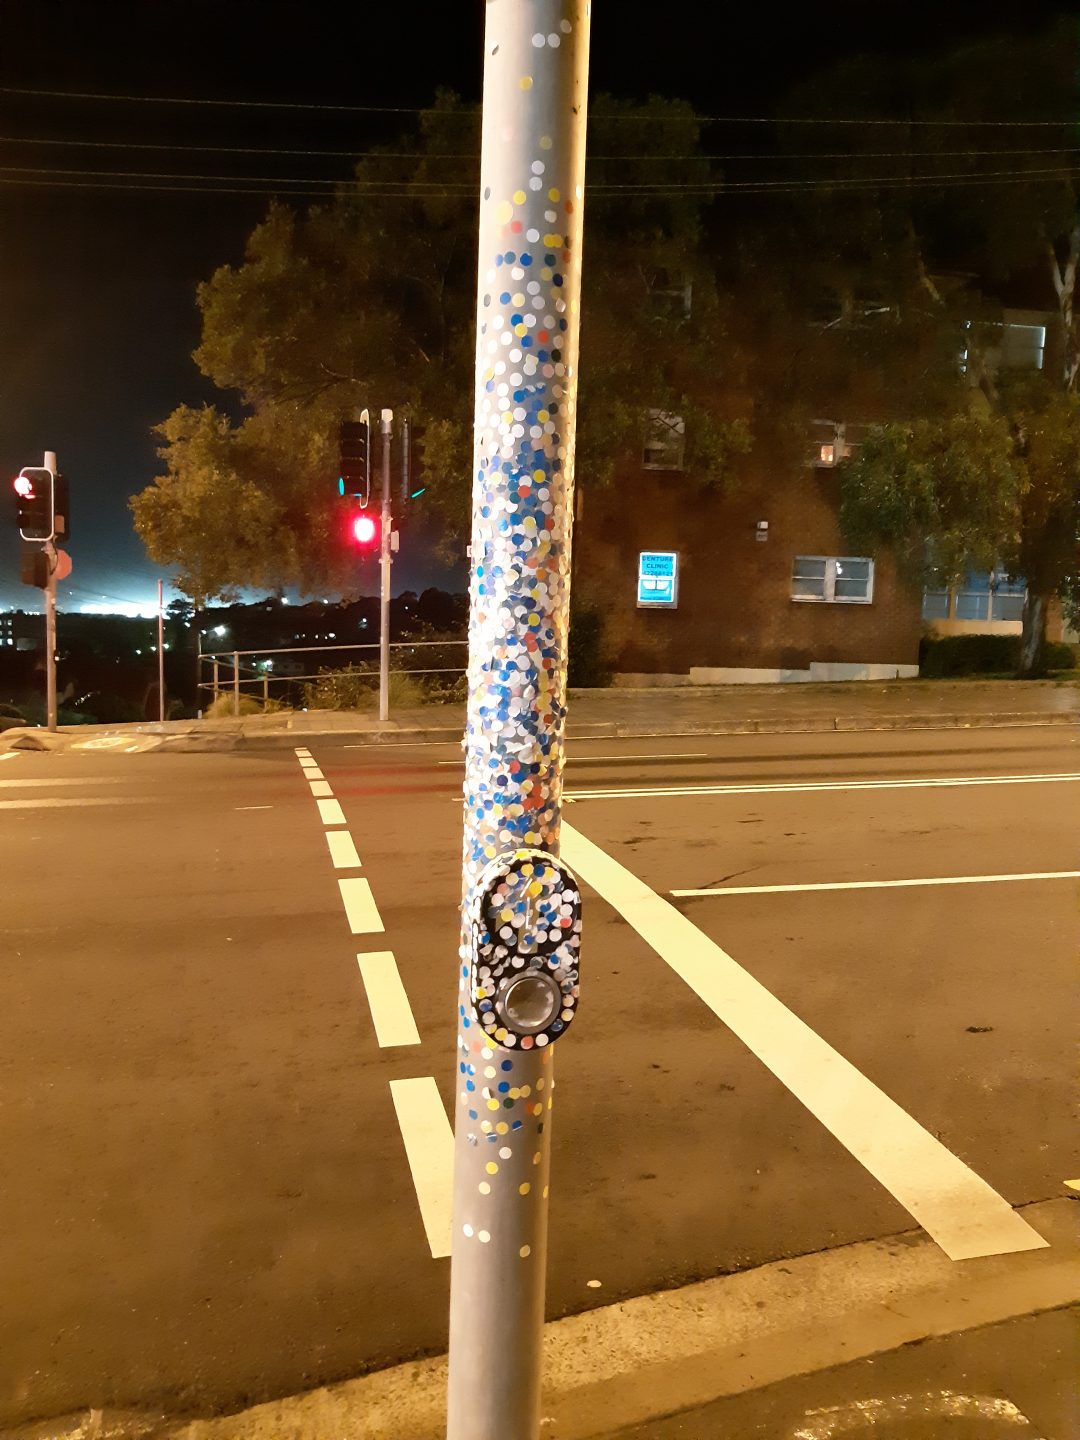 Traffic light pedestrian crossing button and pole covered in coloured stickers